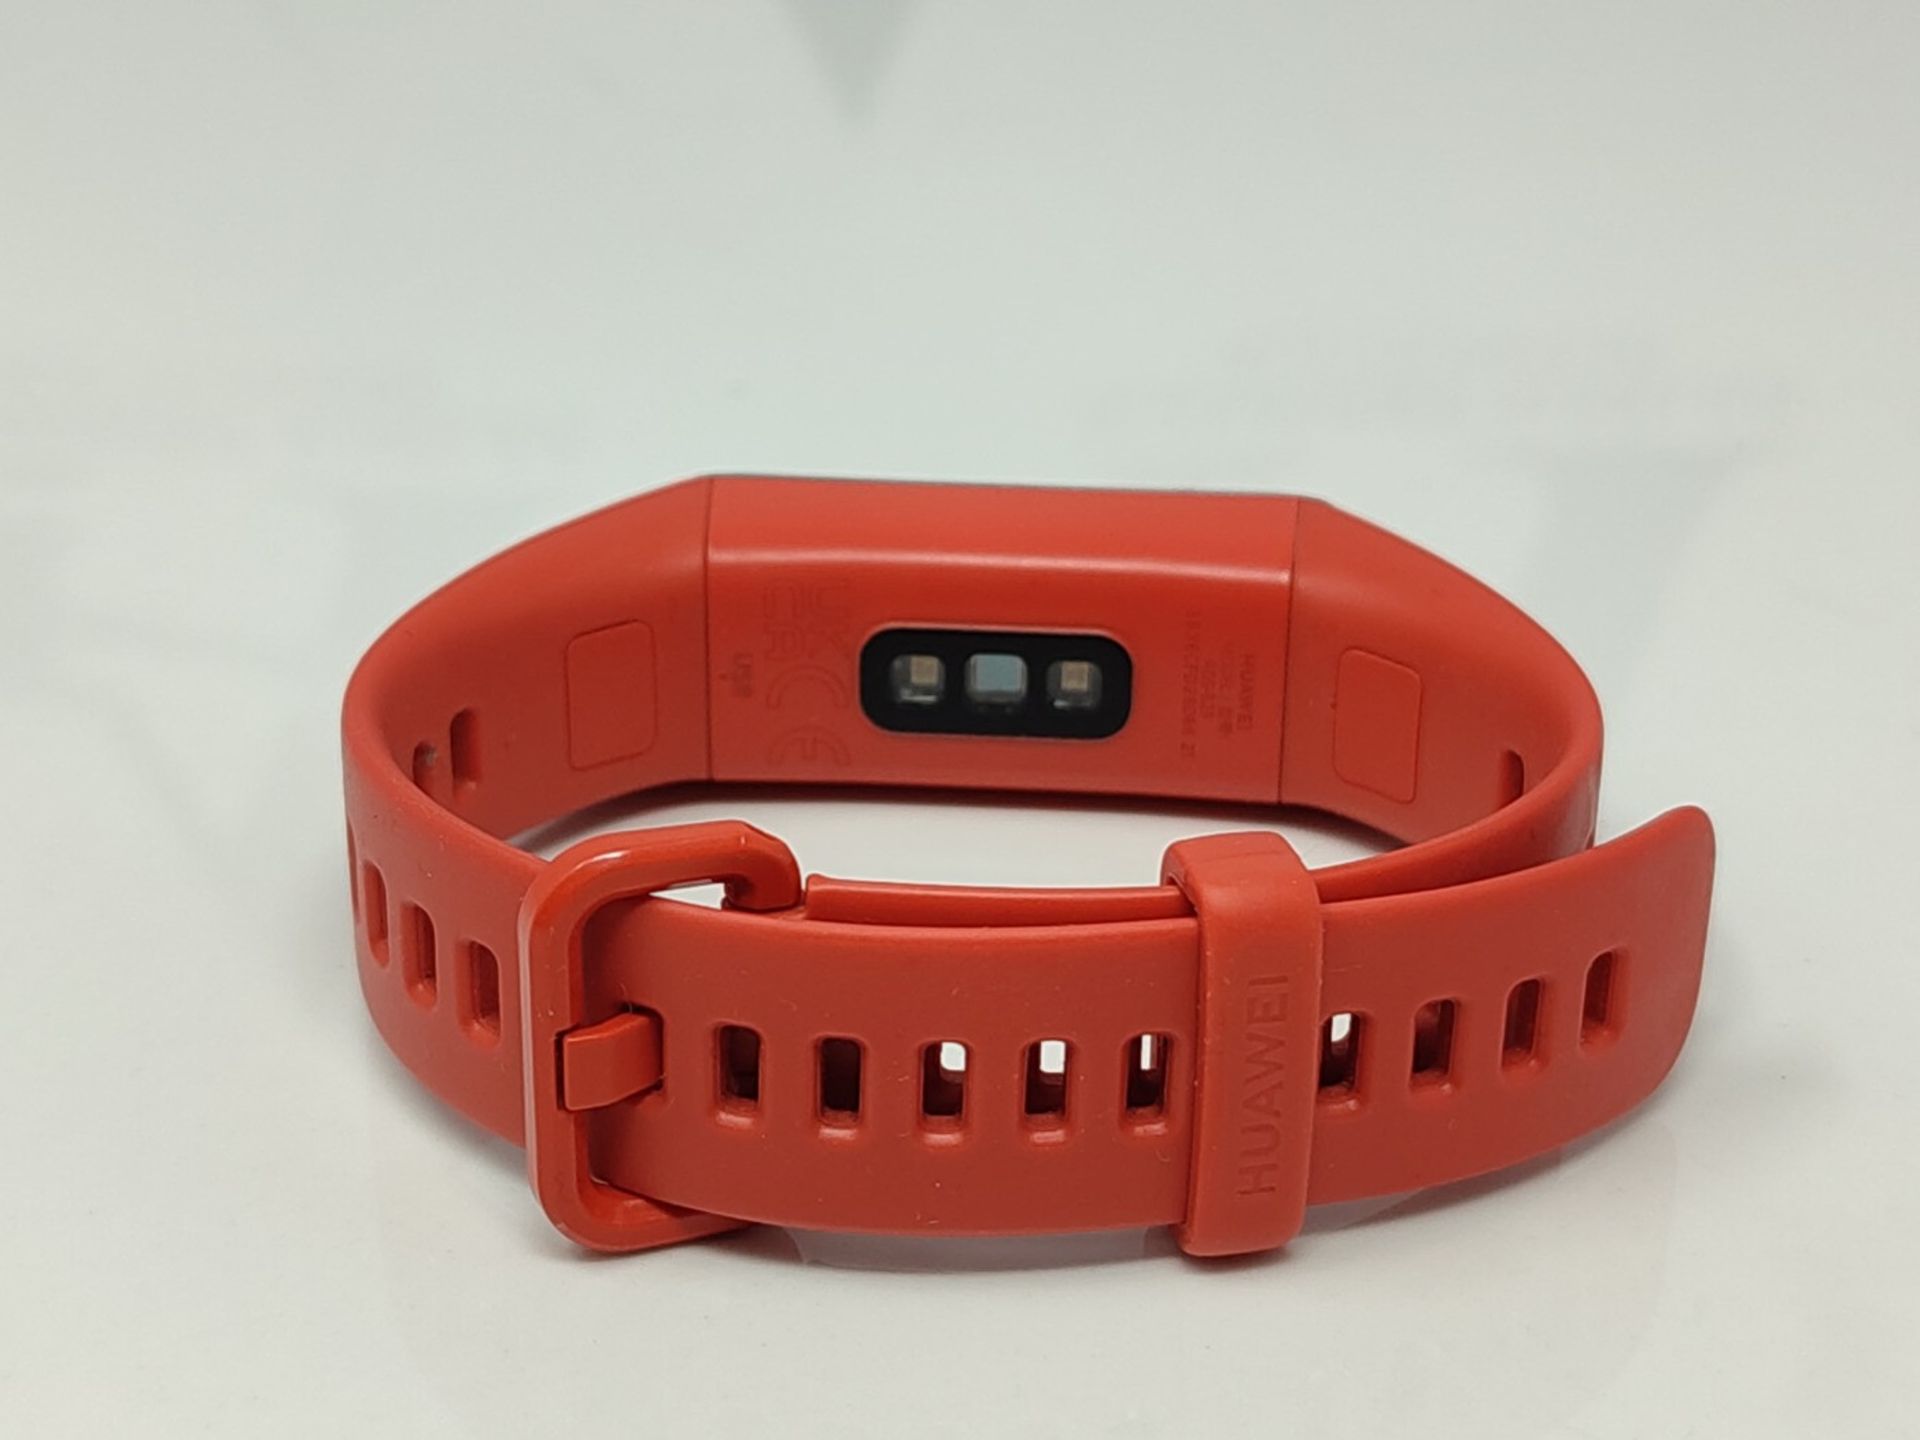 HUAWEI Band 4 Smart Band, Fitness Activities Tracker with 0.96" Color Screen, 24/7 Con - Image 3 of 3